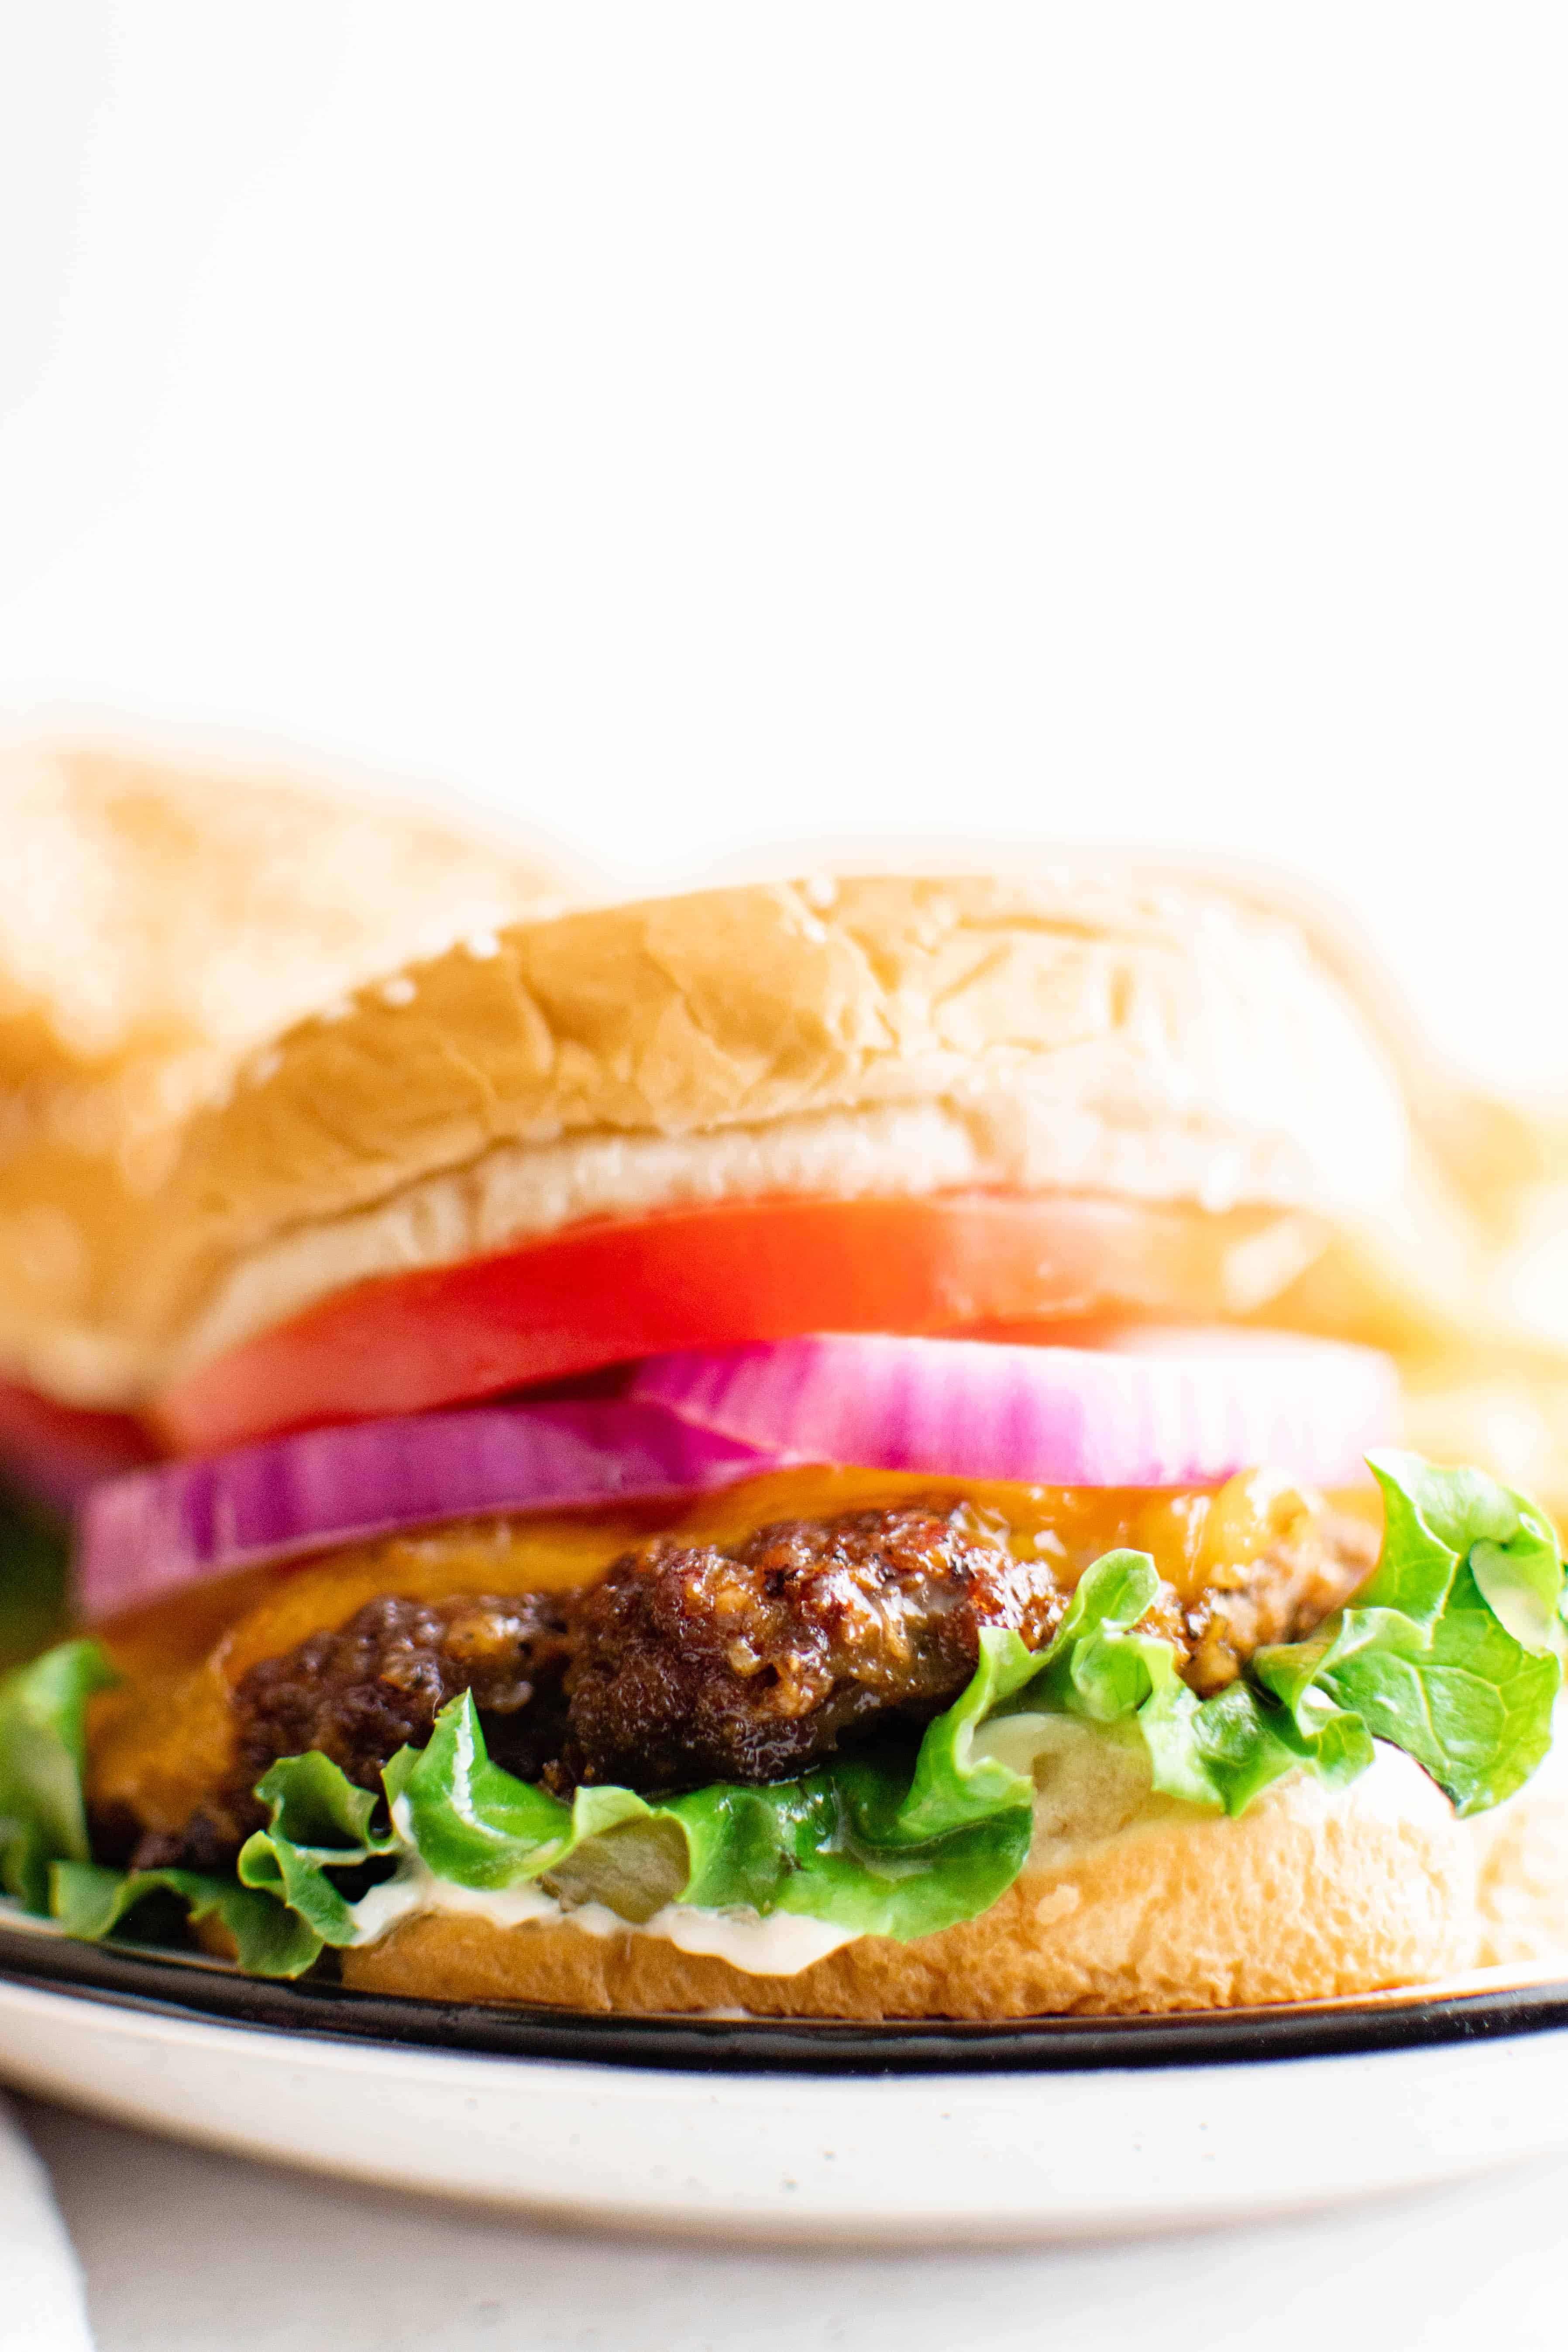 Close up image of a single hamburger patty with cheese on a sesame bun with lettuce, mayo, red onion, and tomato.